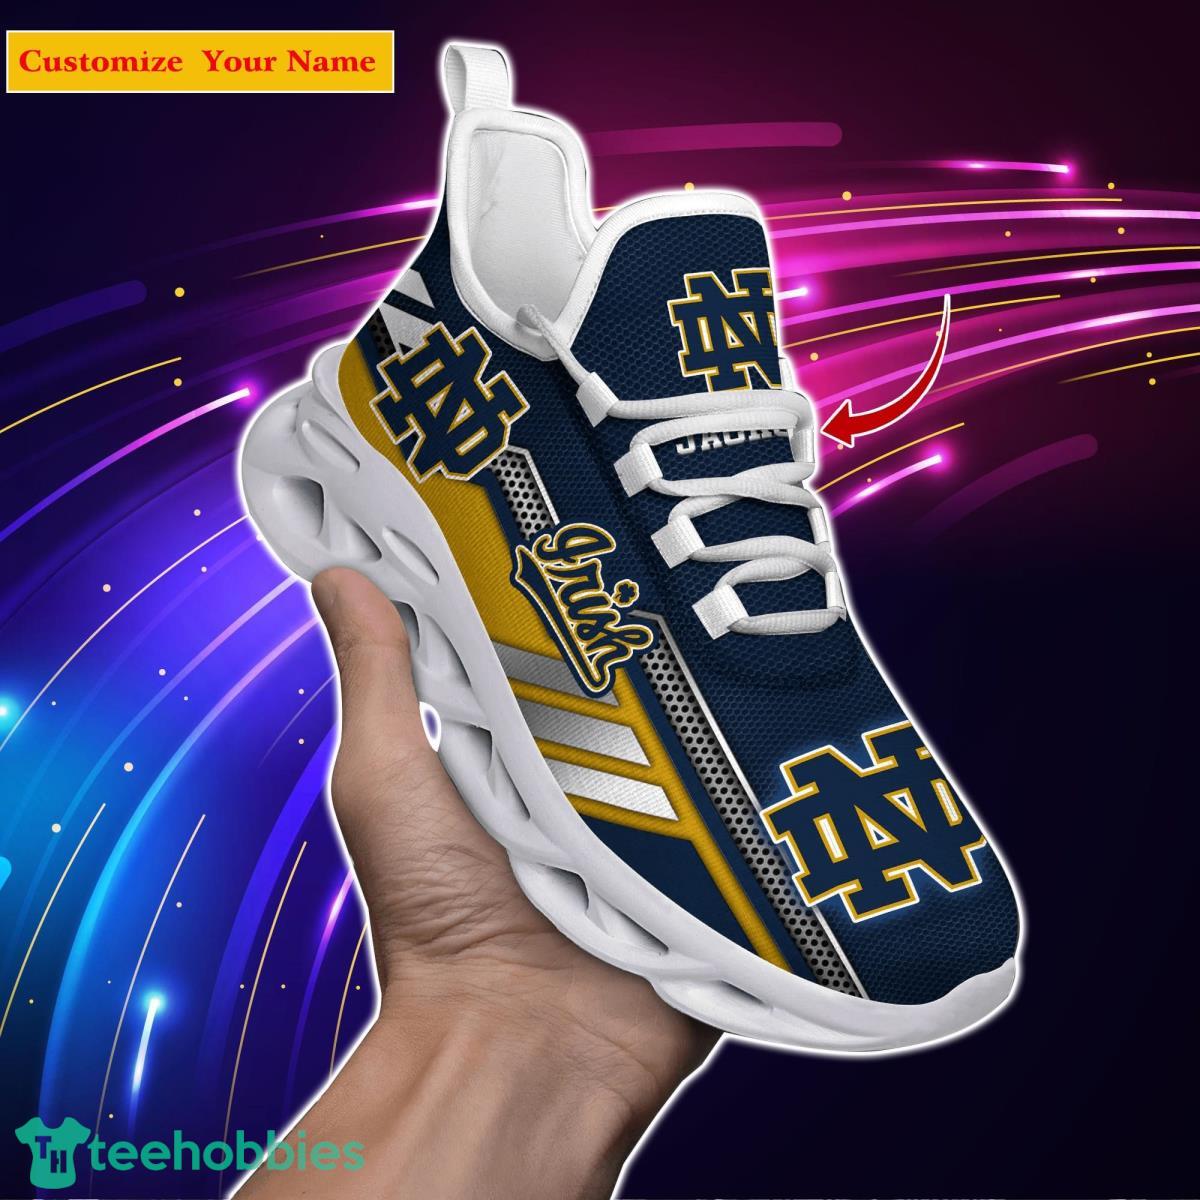 Notre Dame Fighting Irish NCAA1 Custom Name Max Soul Shoes Bet Gift For Men Women Fans Product Photo 1